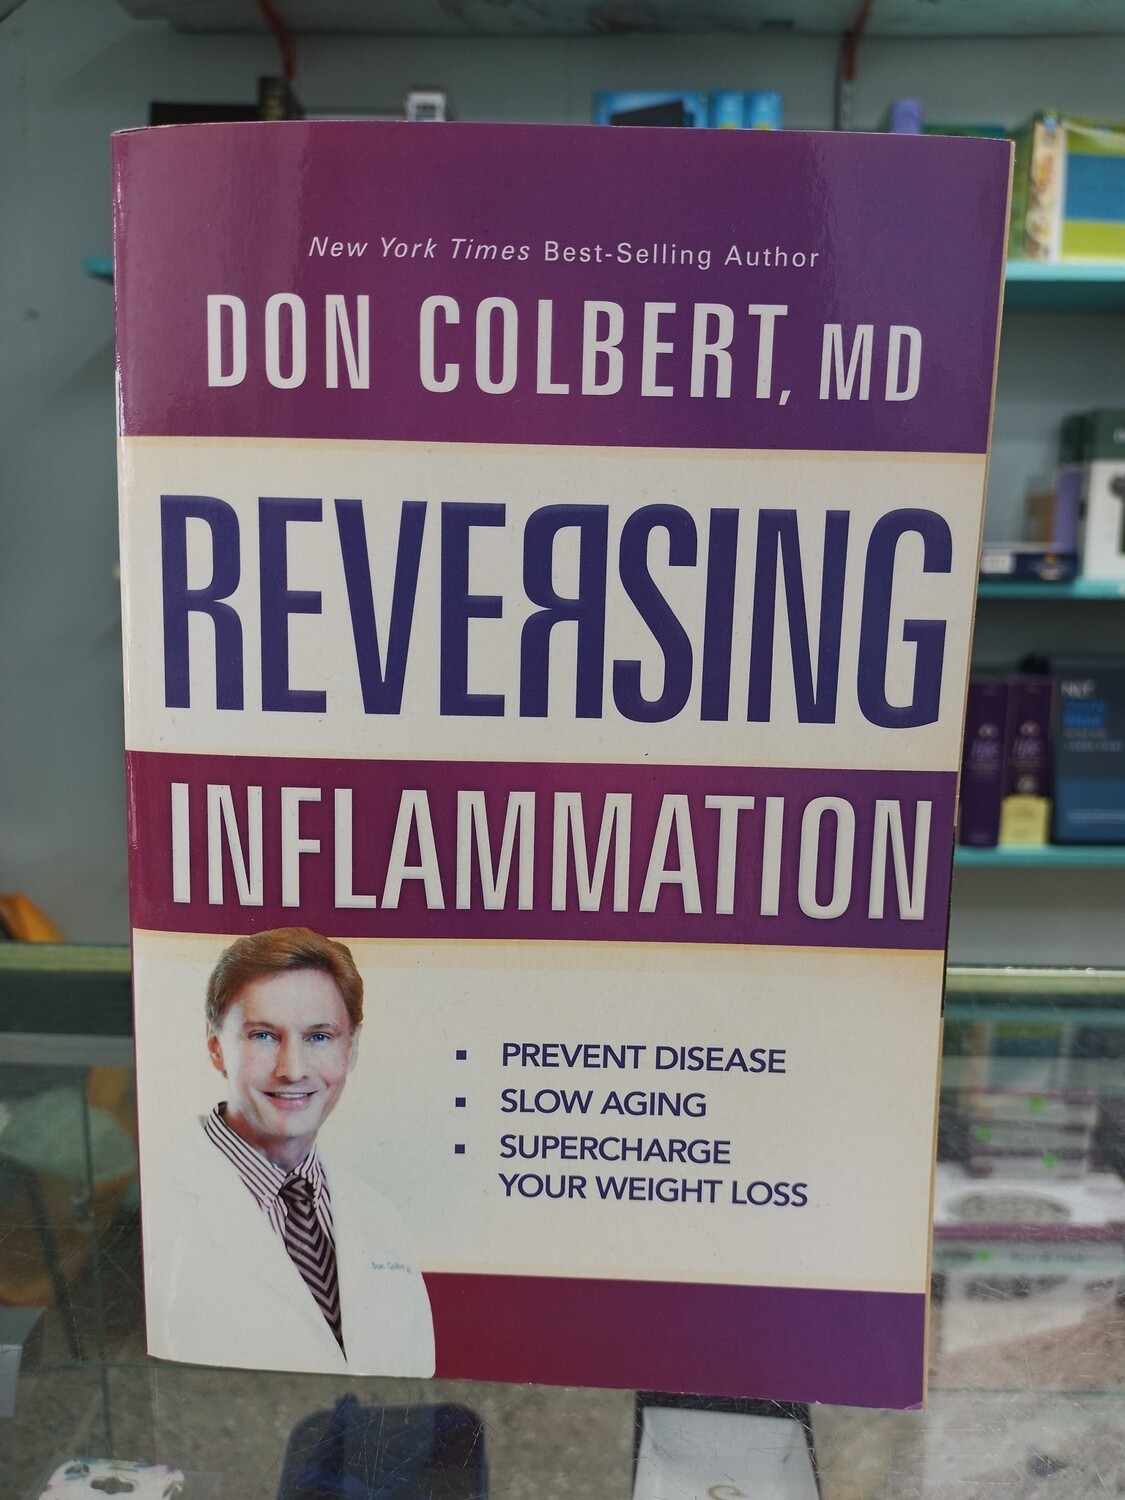 Reversing Inflamation by Don Colbert MD